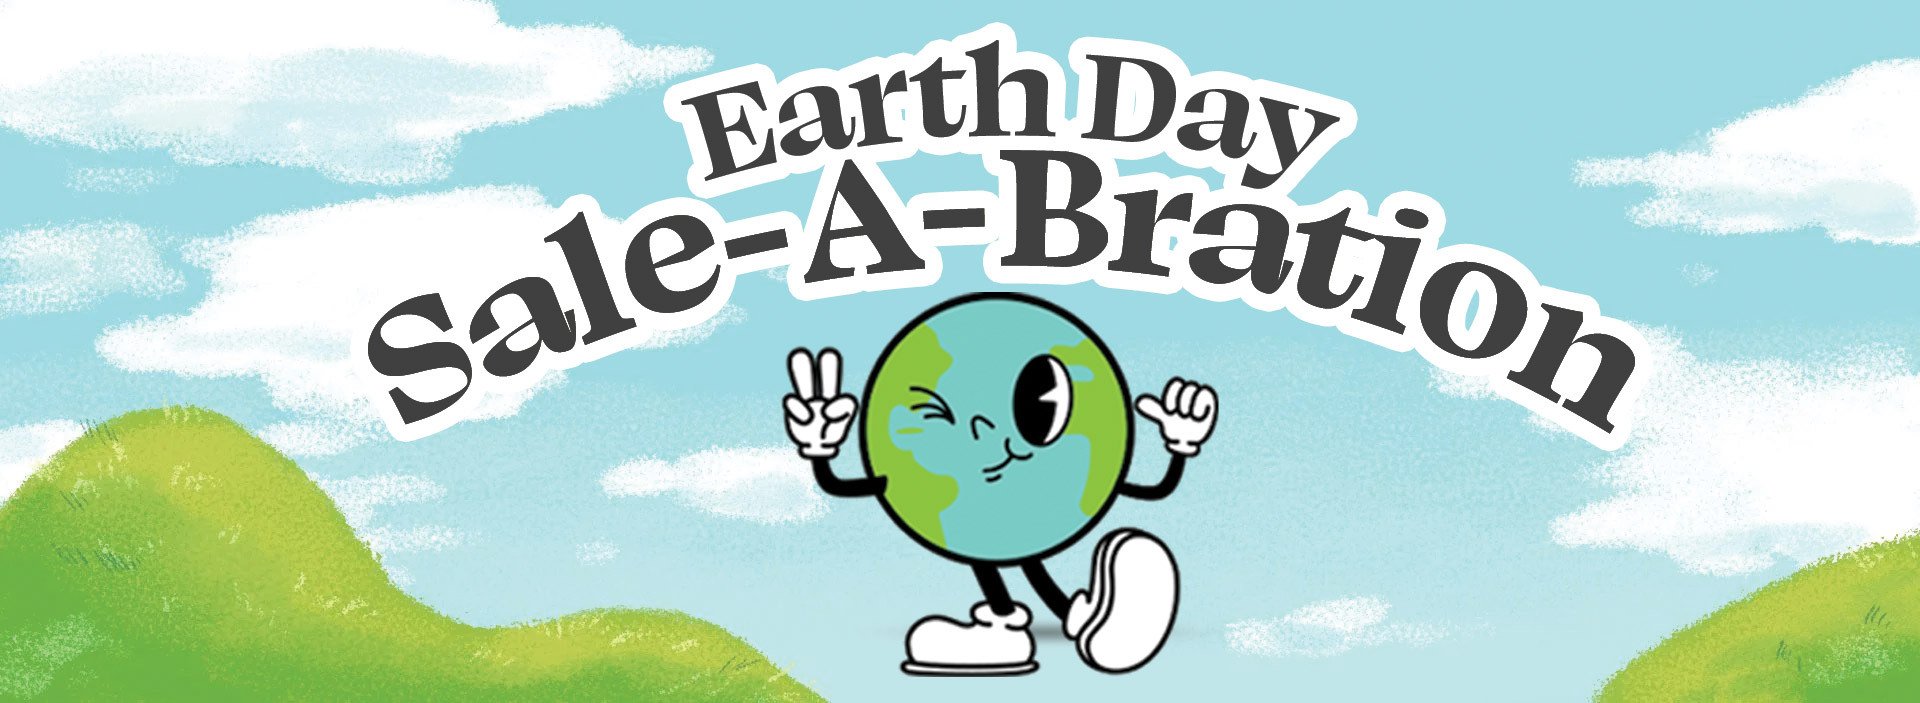 Earth Day Sale-a-bration